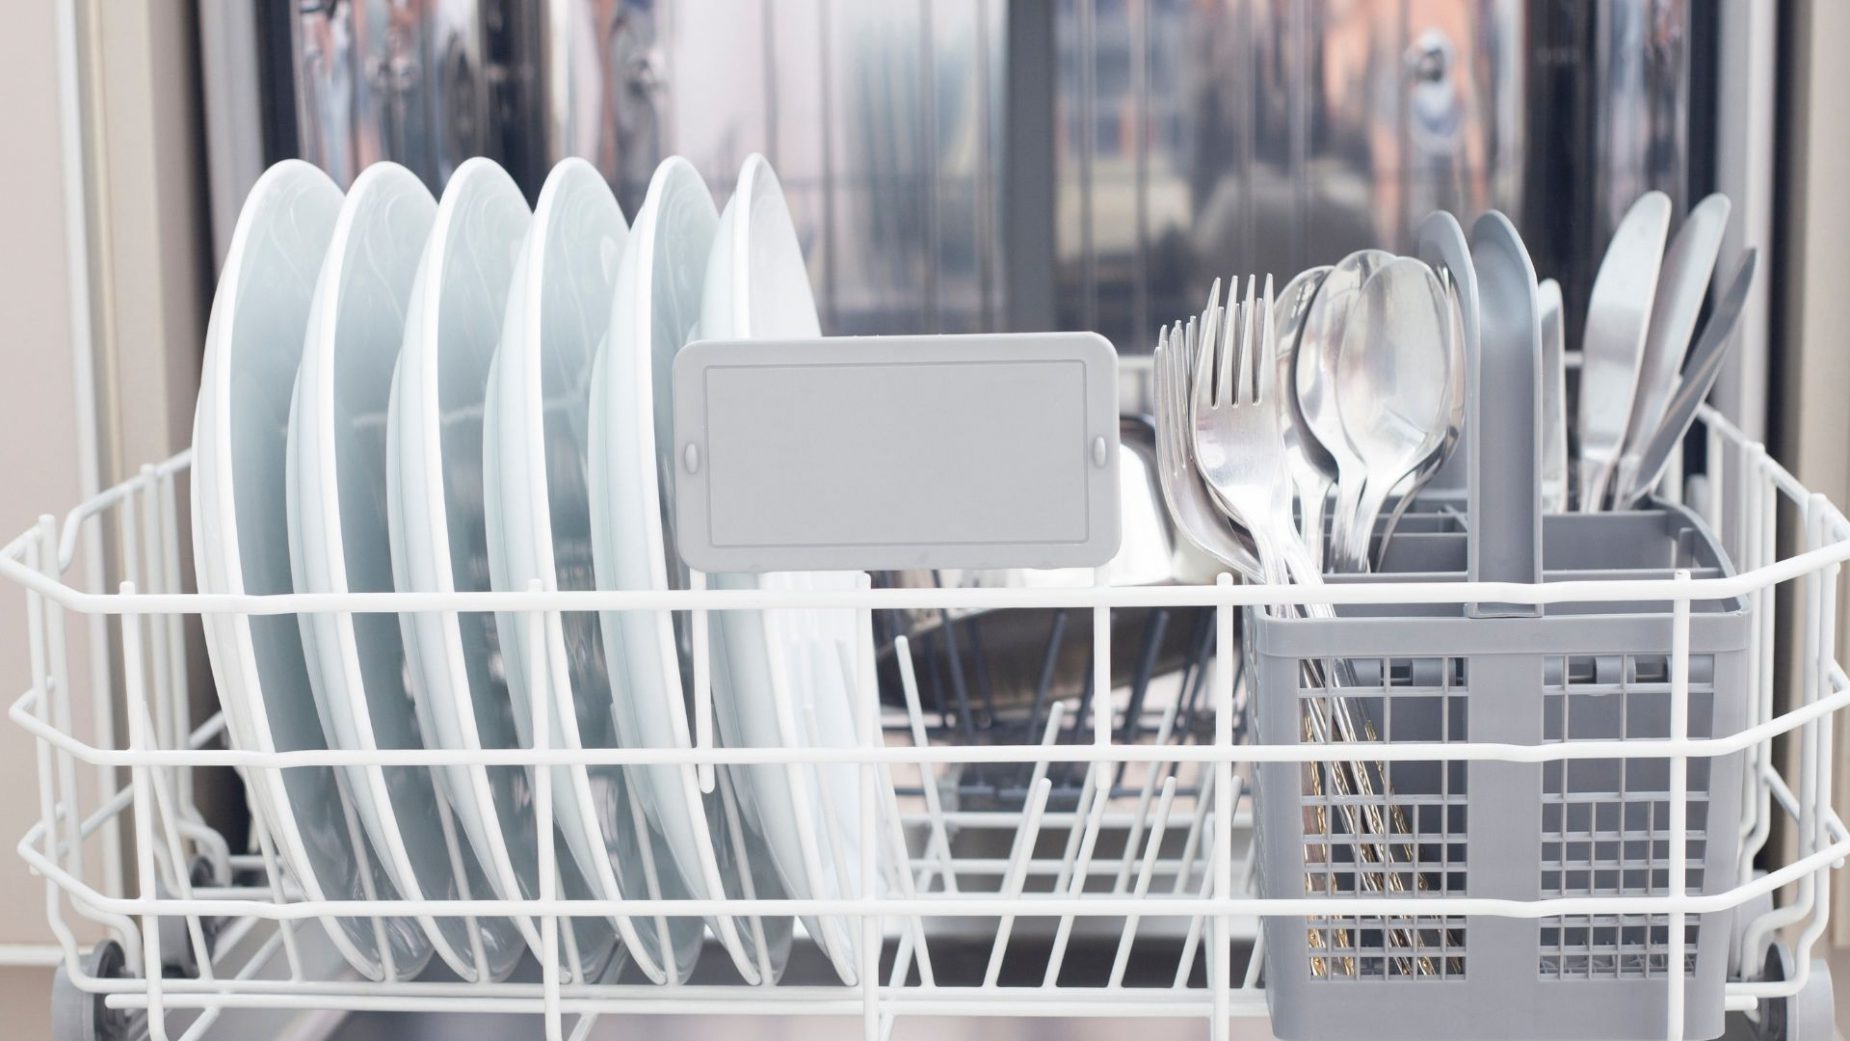 Global Dishwashers Market Outlook, Opportunities And Strategies